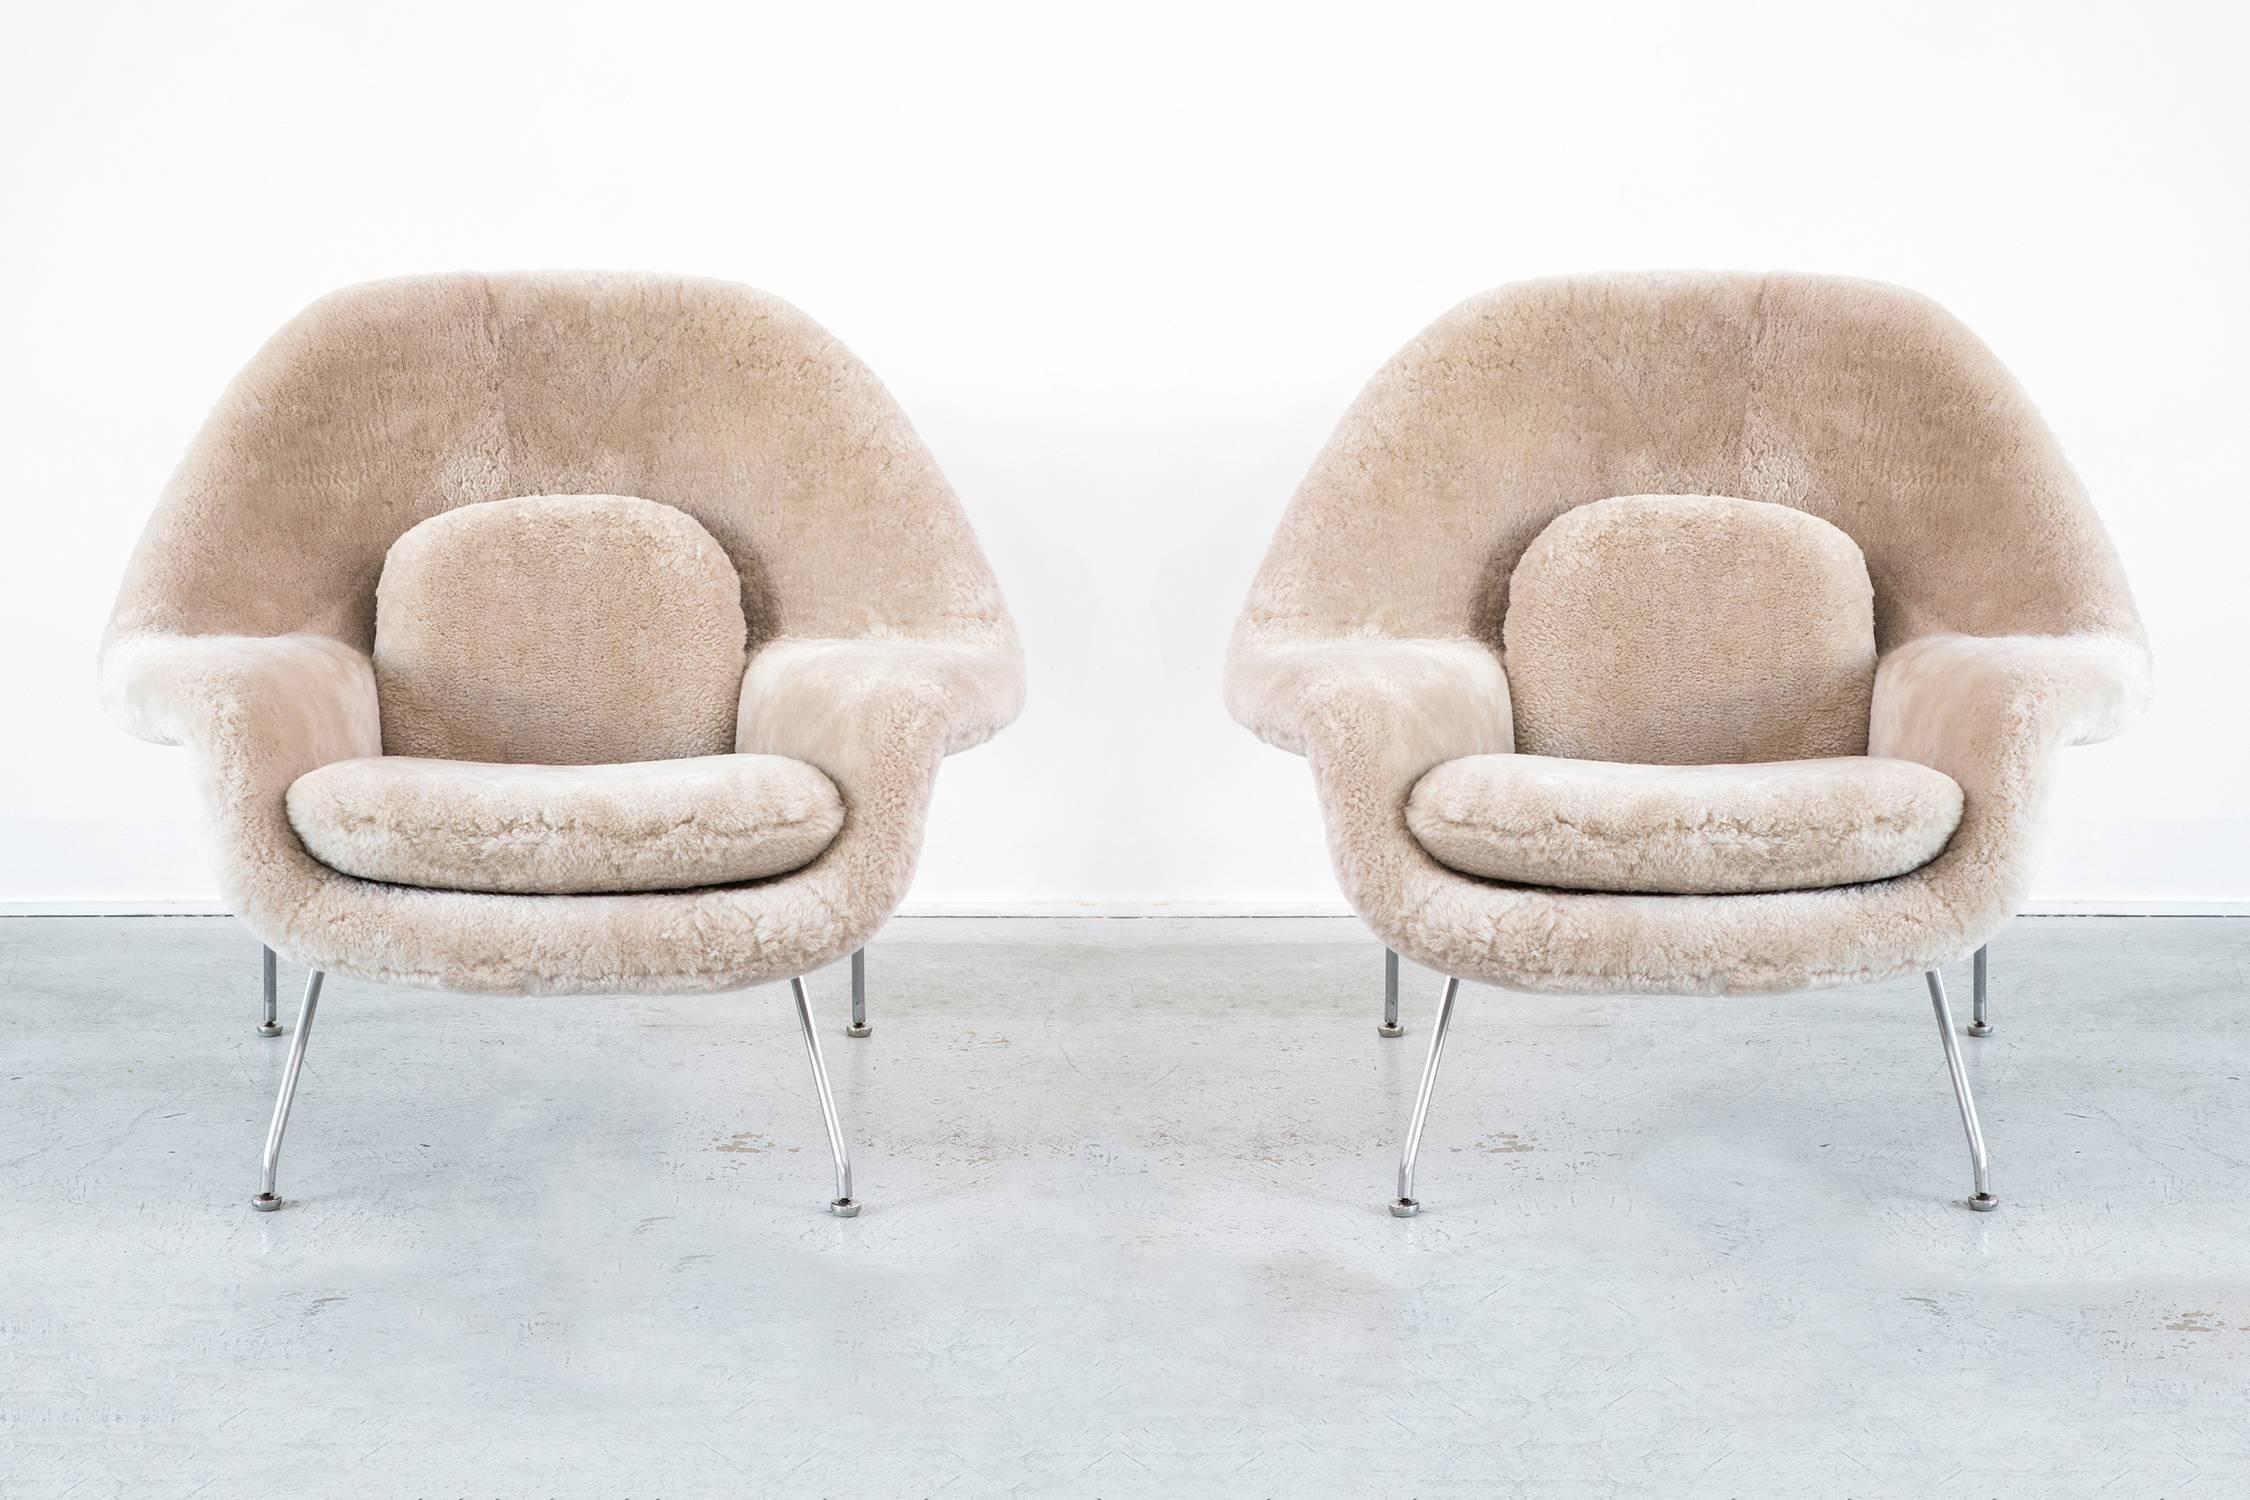 Set of Womb chairs

Designed by Eero Saarinen for Knoll

USA, d 1948 / circa 1960s

Reupholstered in wool shearling and steel frame

Measures: 35 ½" H x 40" W x 34" D x seat 16" h

Sold either as a set for $13,800 or